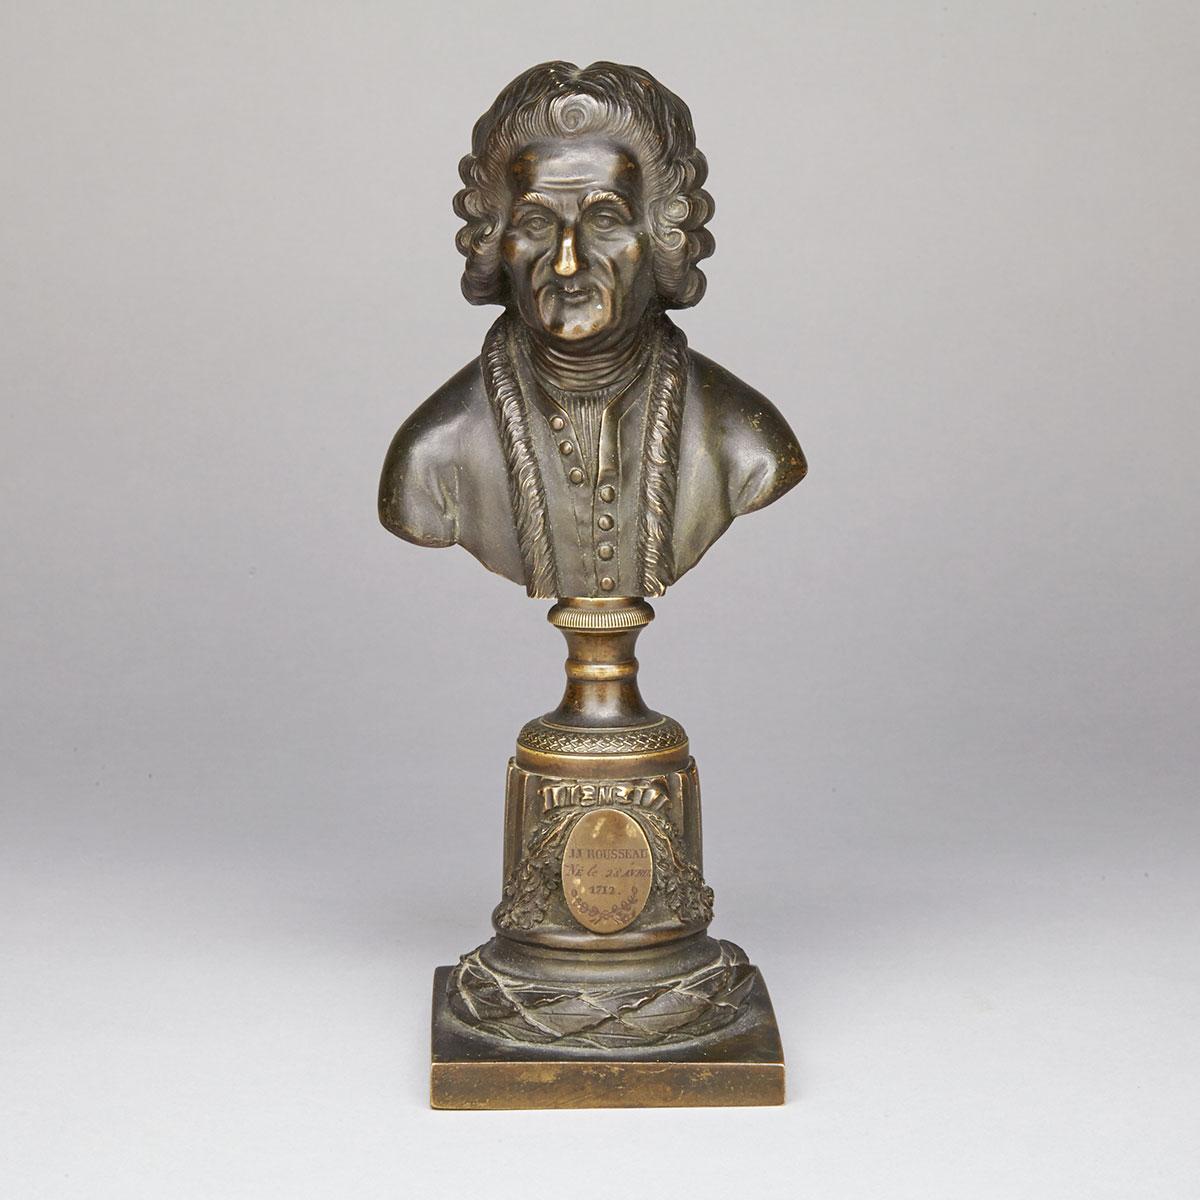 French Bronze Bust of Jean-Jacques Rousseau, 2nd half 18th century